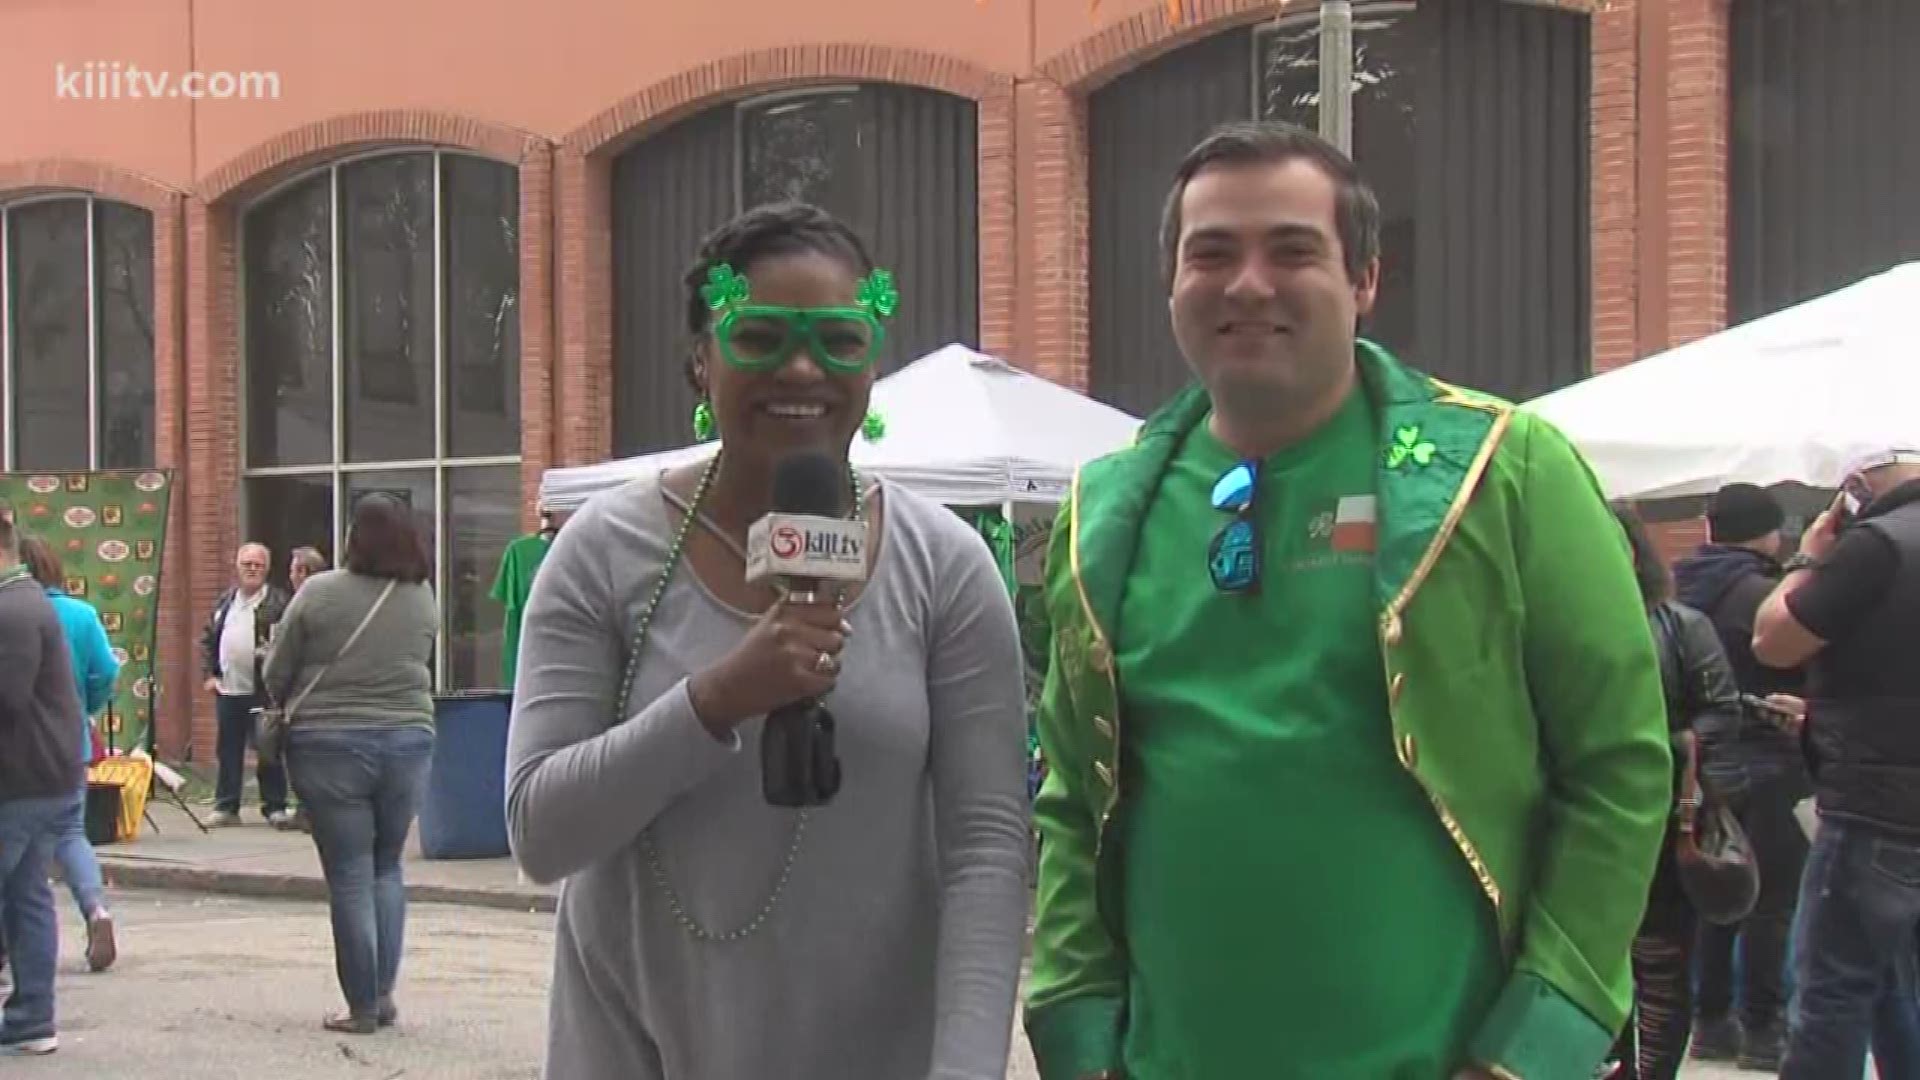 Thousands of people celebrated St. Patrick's Day early on Saturday in downtown Corpus Christi.